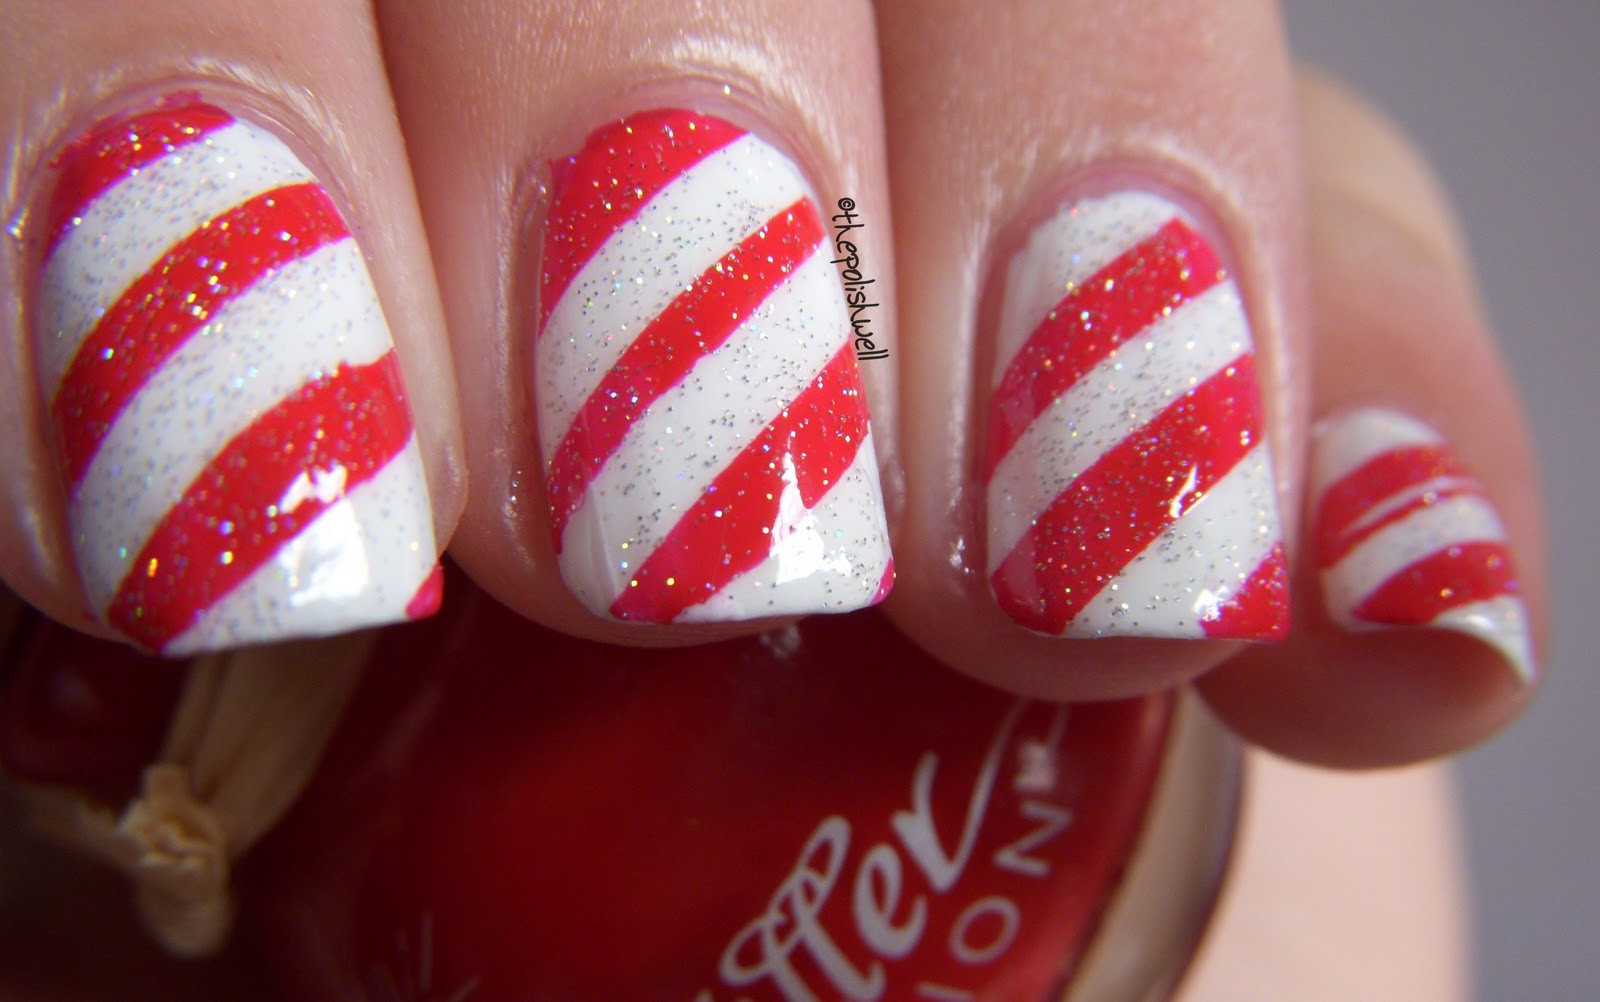 Candy Cane Nail Art
 The Polish Well 12 Days of Christmas Day 8 Candy Cane